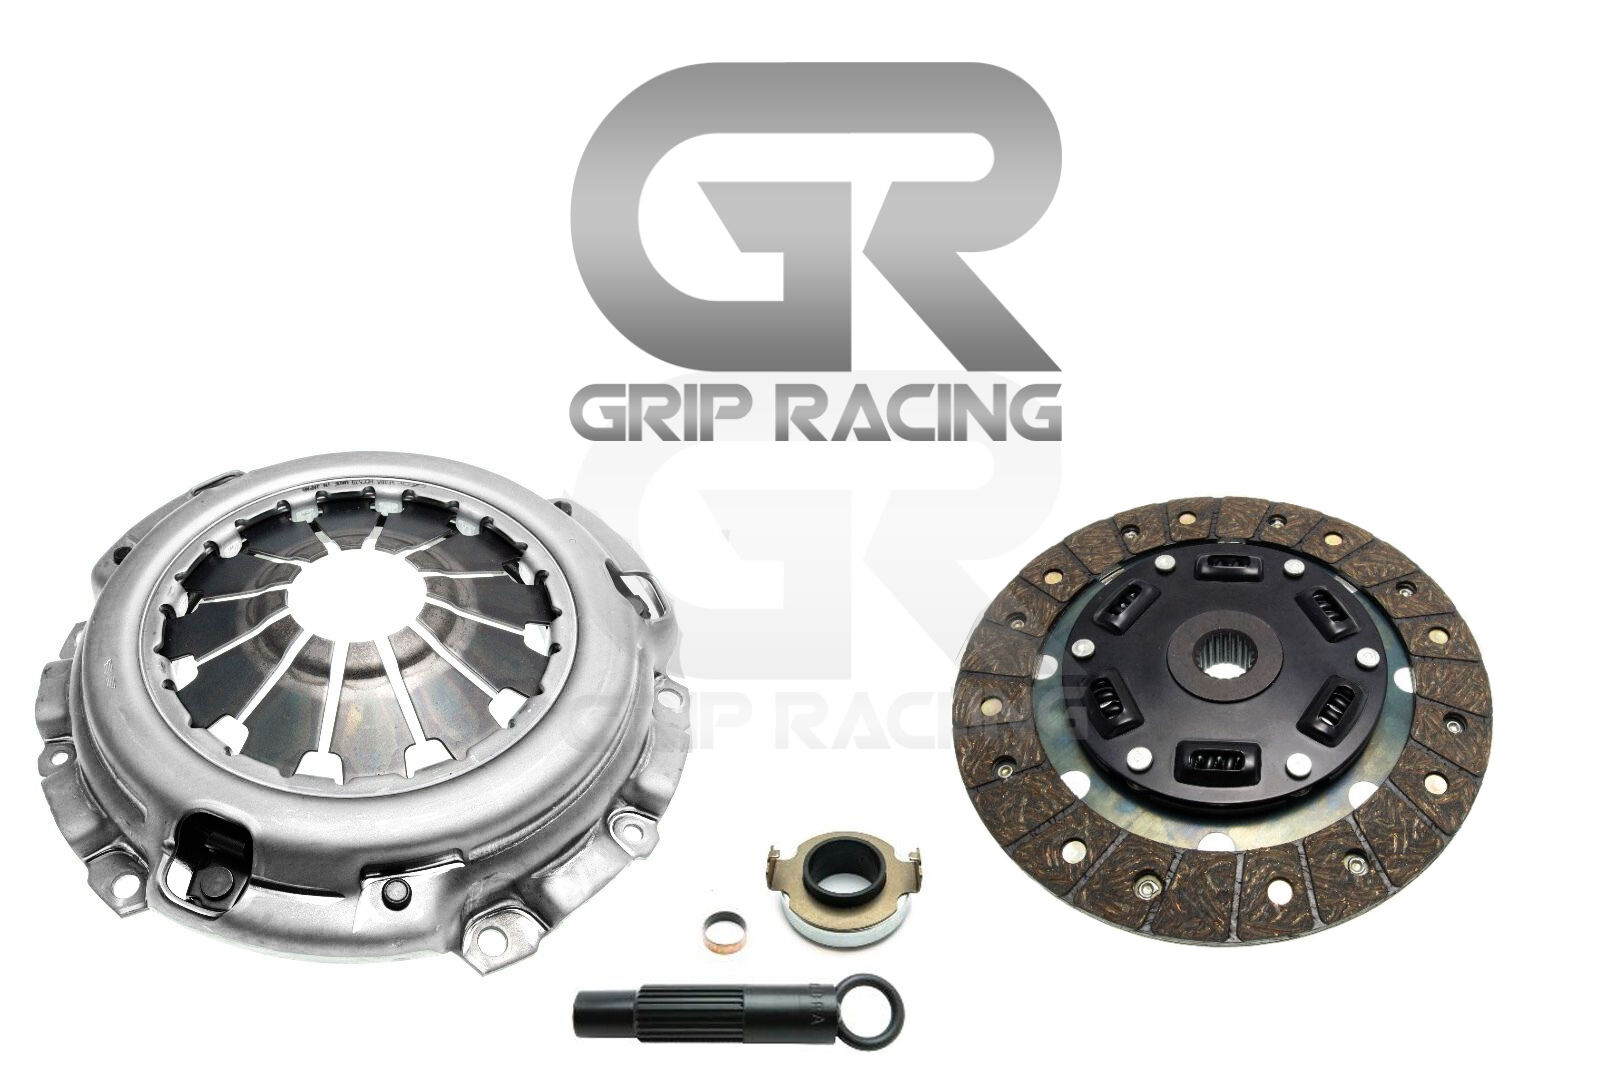 GRIP RACING STAGE 2 HD CLUTCH KIT for RSX TYPE-S CIVIC SI 6 SPEED *MADE IN USA*